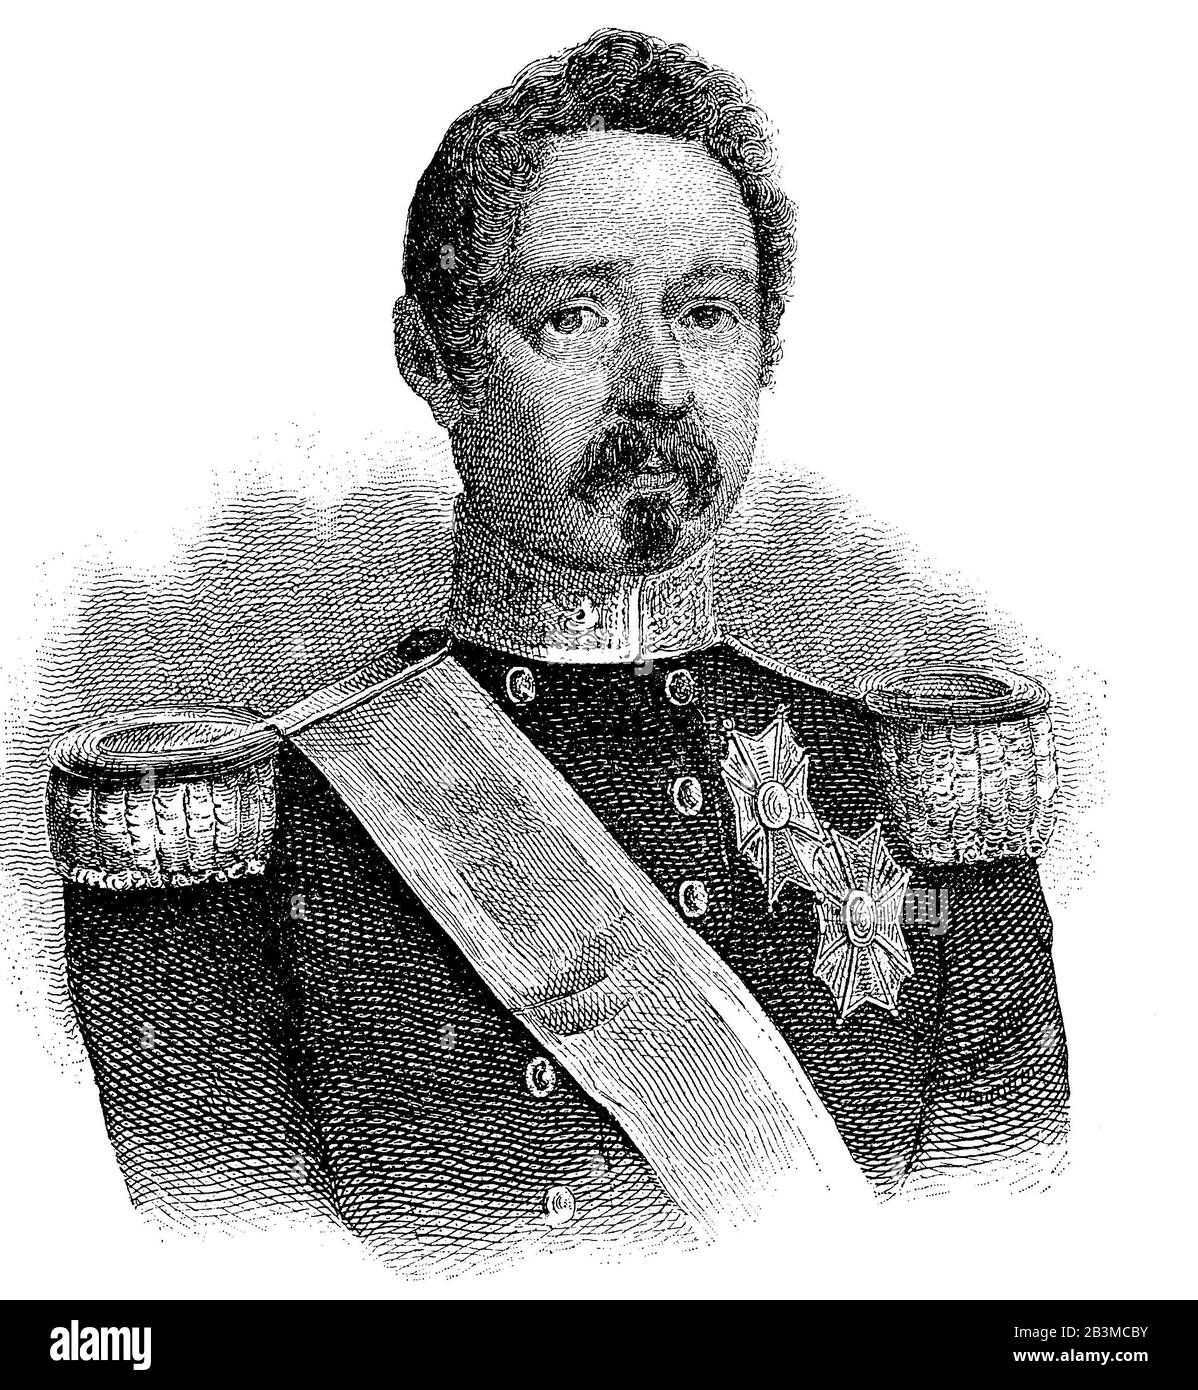 Ramón María Narváez y Campos, 1st Duke of Valencia, 5 August 1800 – 23 April 1868, was a Spanish general and statesman who was Prime Minister of Spain on several occasions  /  Ramón María Narváez y Campos, 1. Herzog von Valencia, 5. August 1800 - 23. April 1868, war ein spanischer General und Staatsmann, der mehrmals spanischer Premierminister war, Historisch, digital improved reproduction of an original from the 19th century / digitale Reproduktion einer Originalvorlage aus dem 19. Jahrhundert Stock Photo